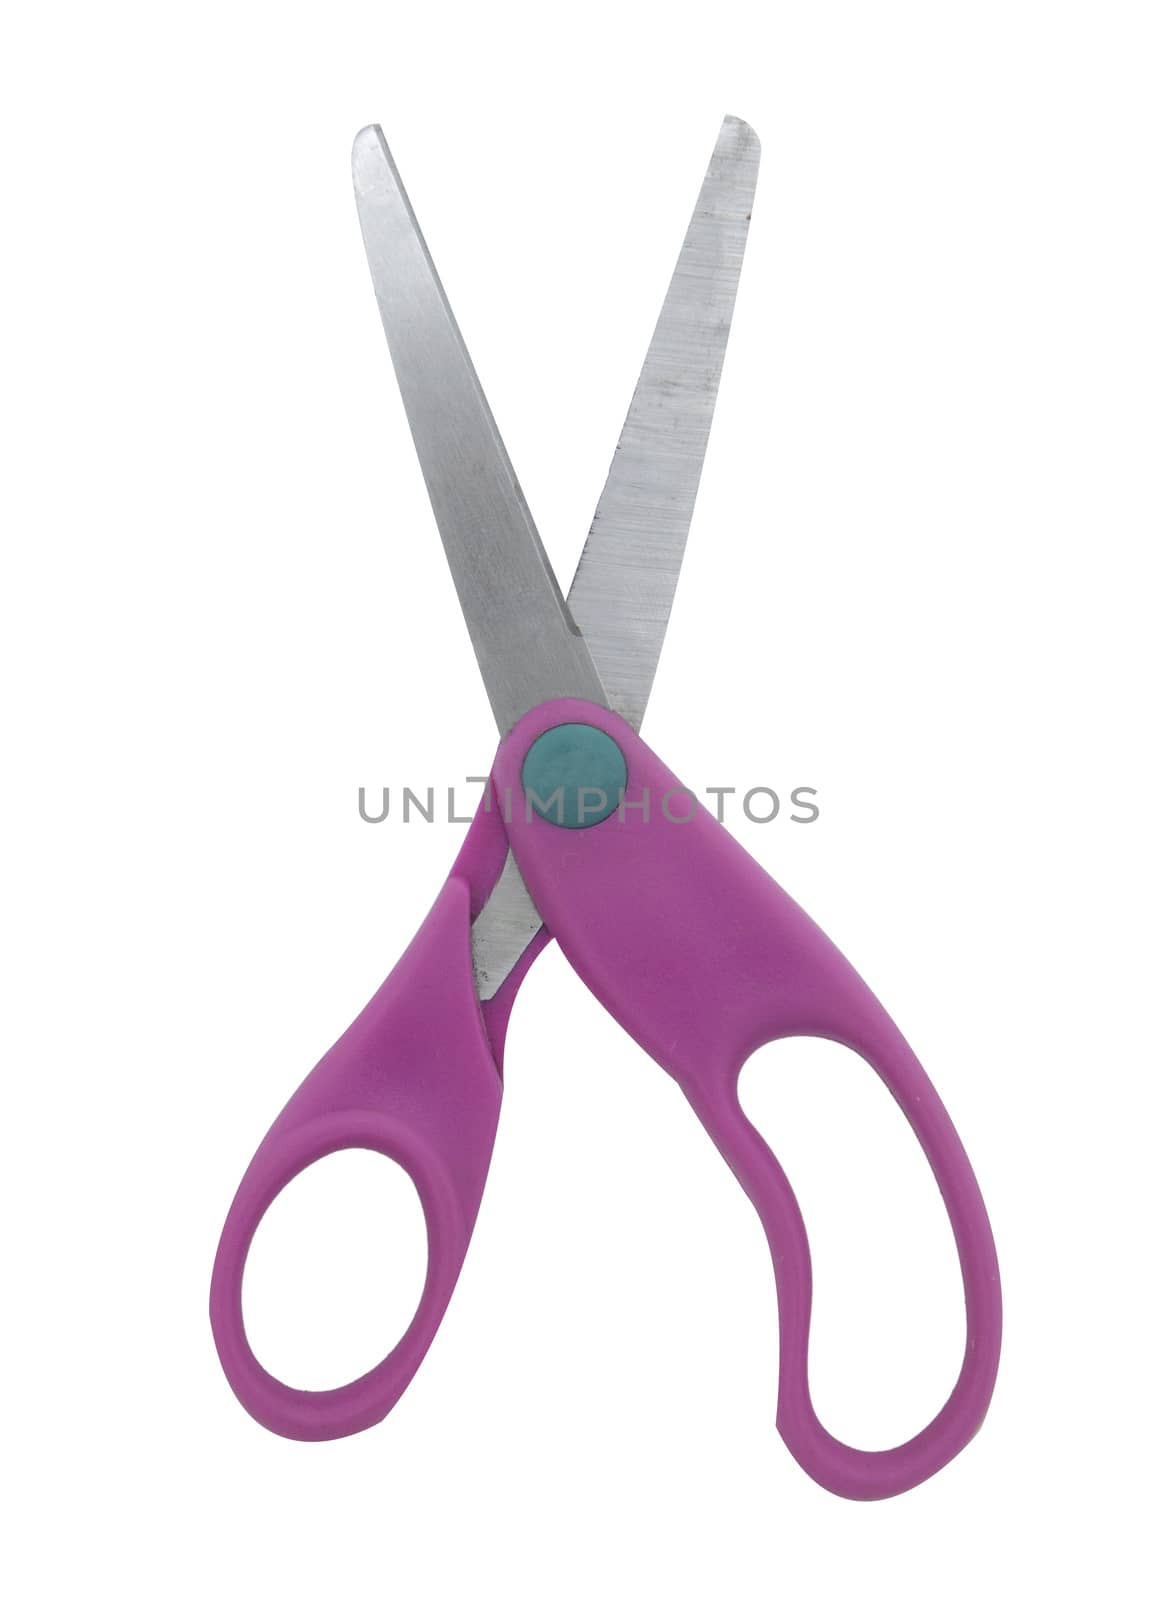 Pink scissors, open and closed on a white background.